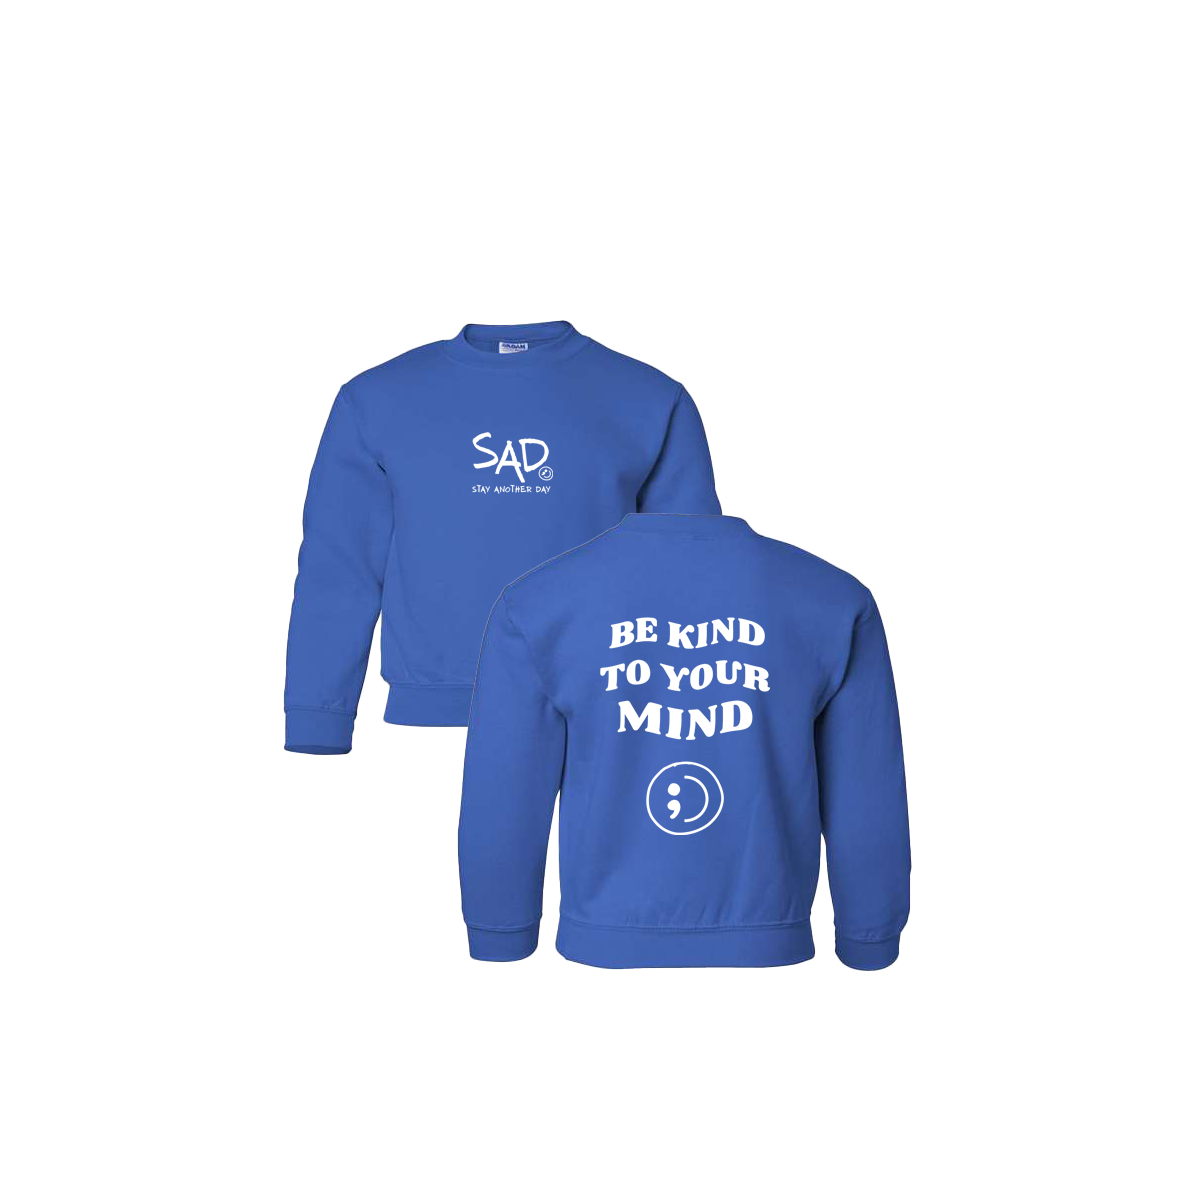 Be Kind To Your Mind Screen Printed Royal Blue Youth Crewneck